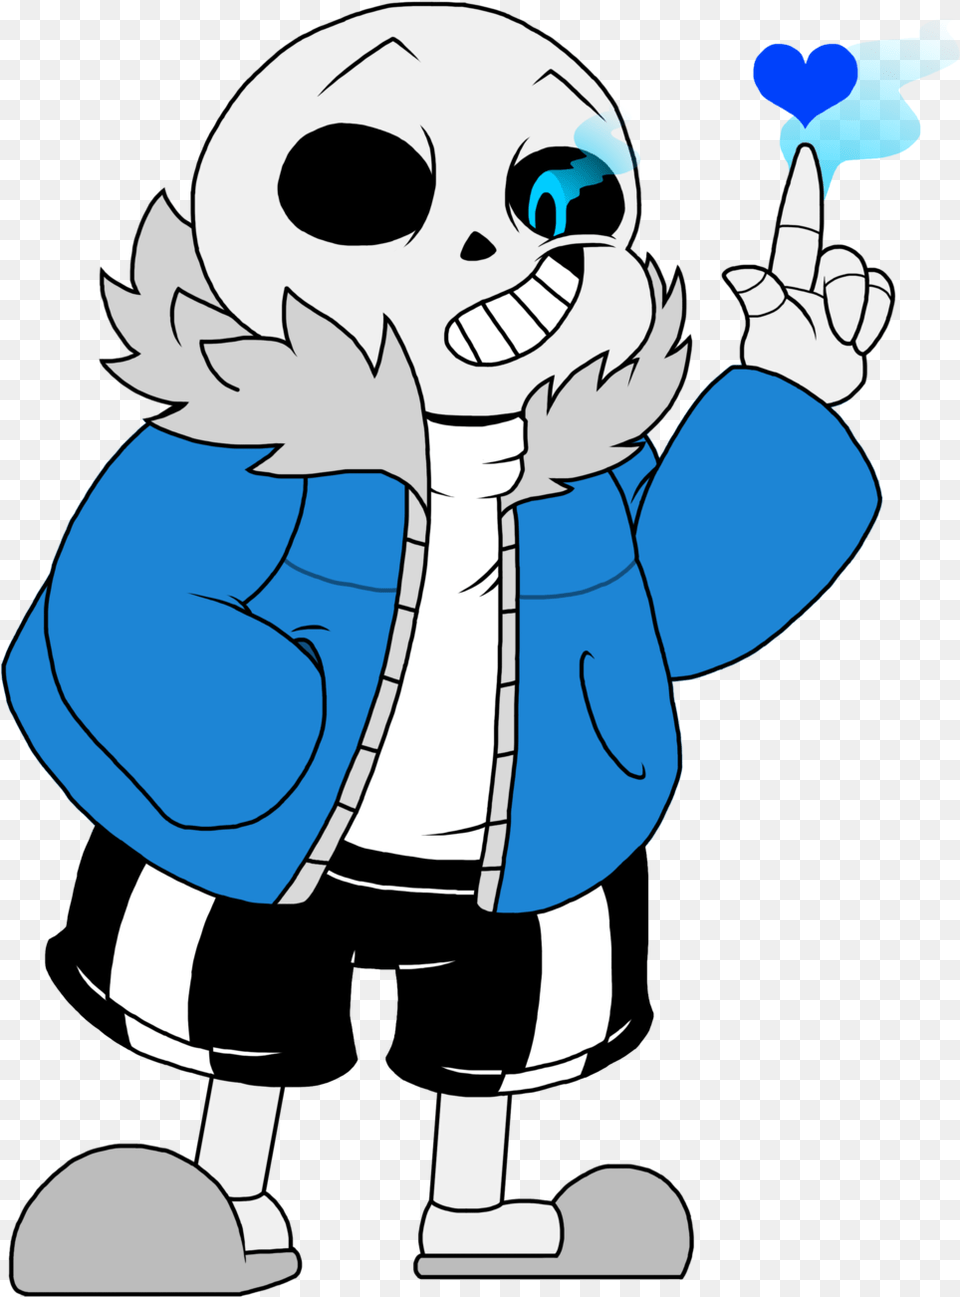 Sans Undertale And Frisk By Fighteramy Undertale Sans, Book, Comics, Publication, Clothing Free Png Download